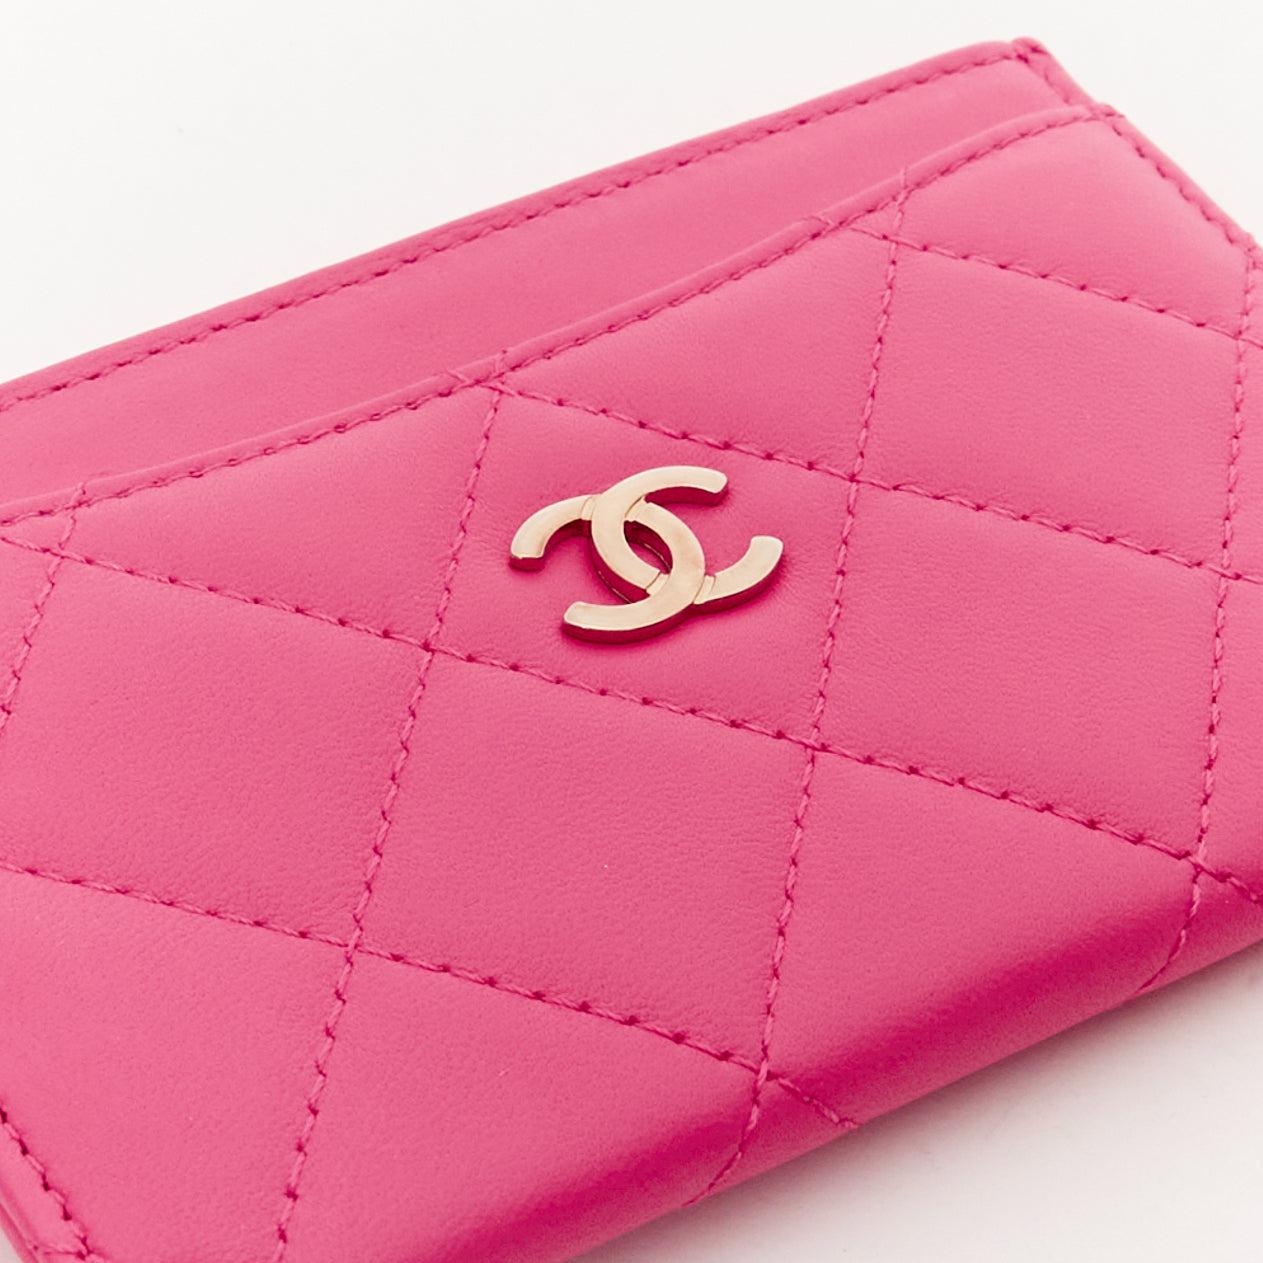 Women's CHANEL bright pink smooth leather CC logo quilted cardholder For Sale